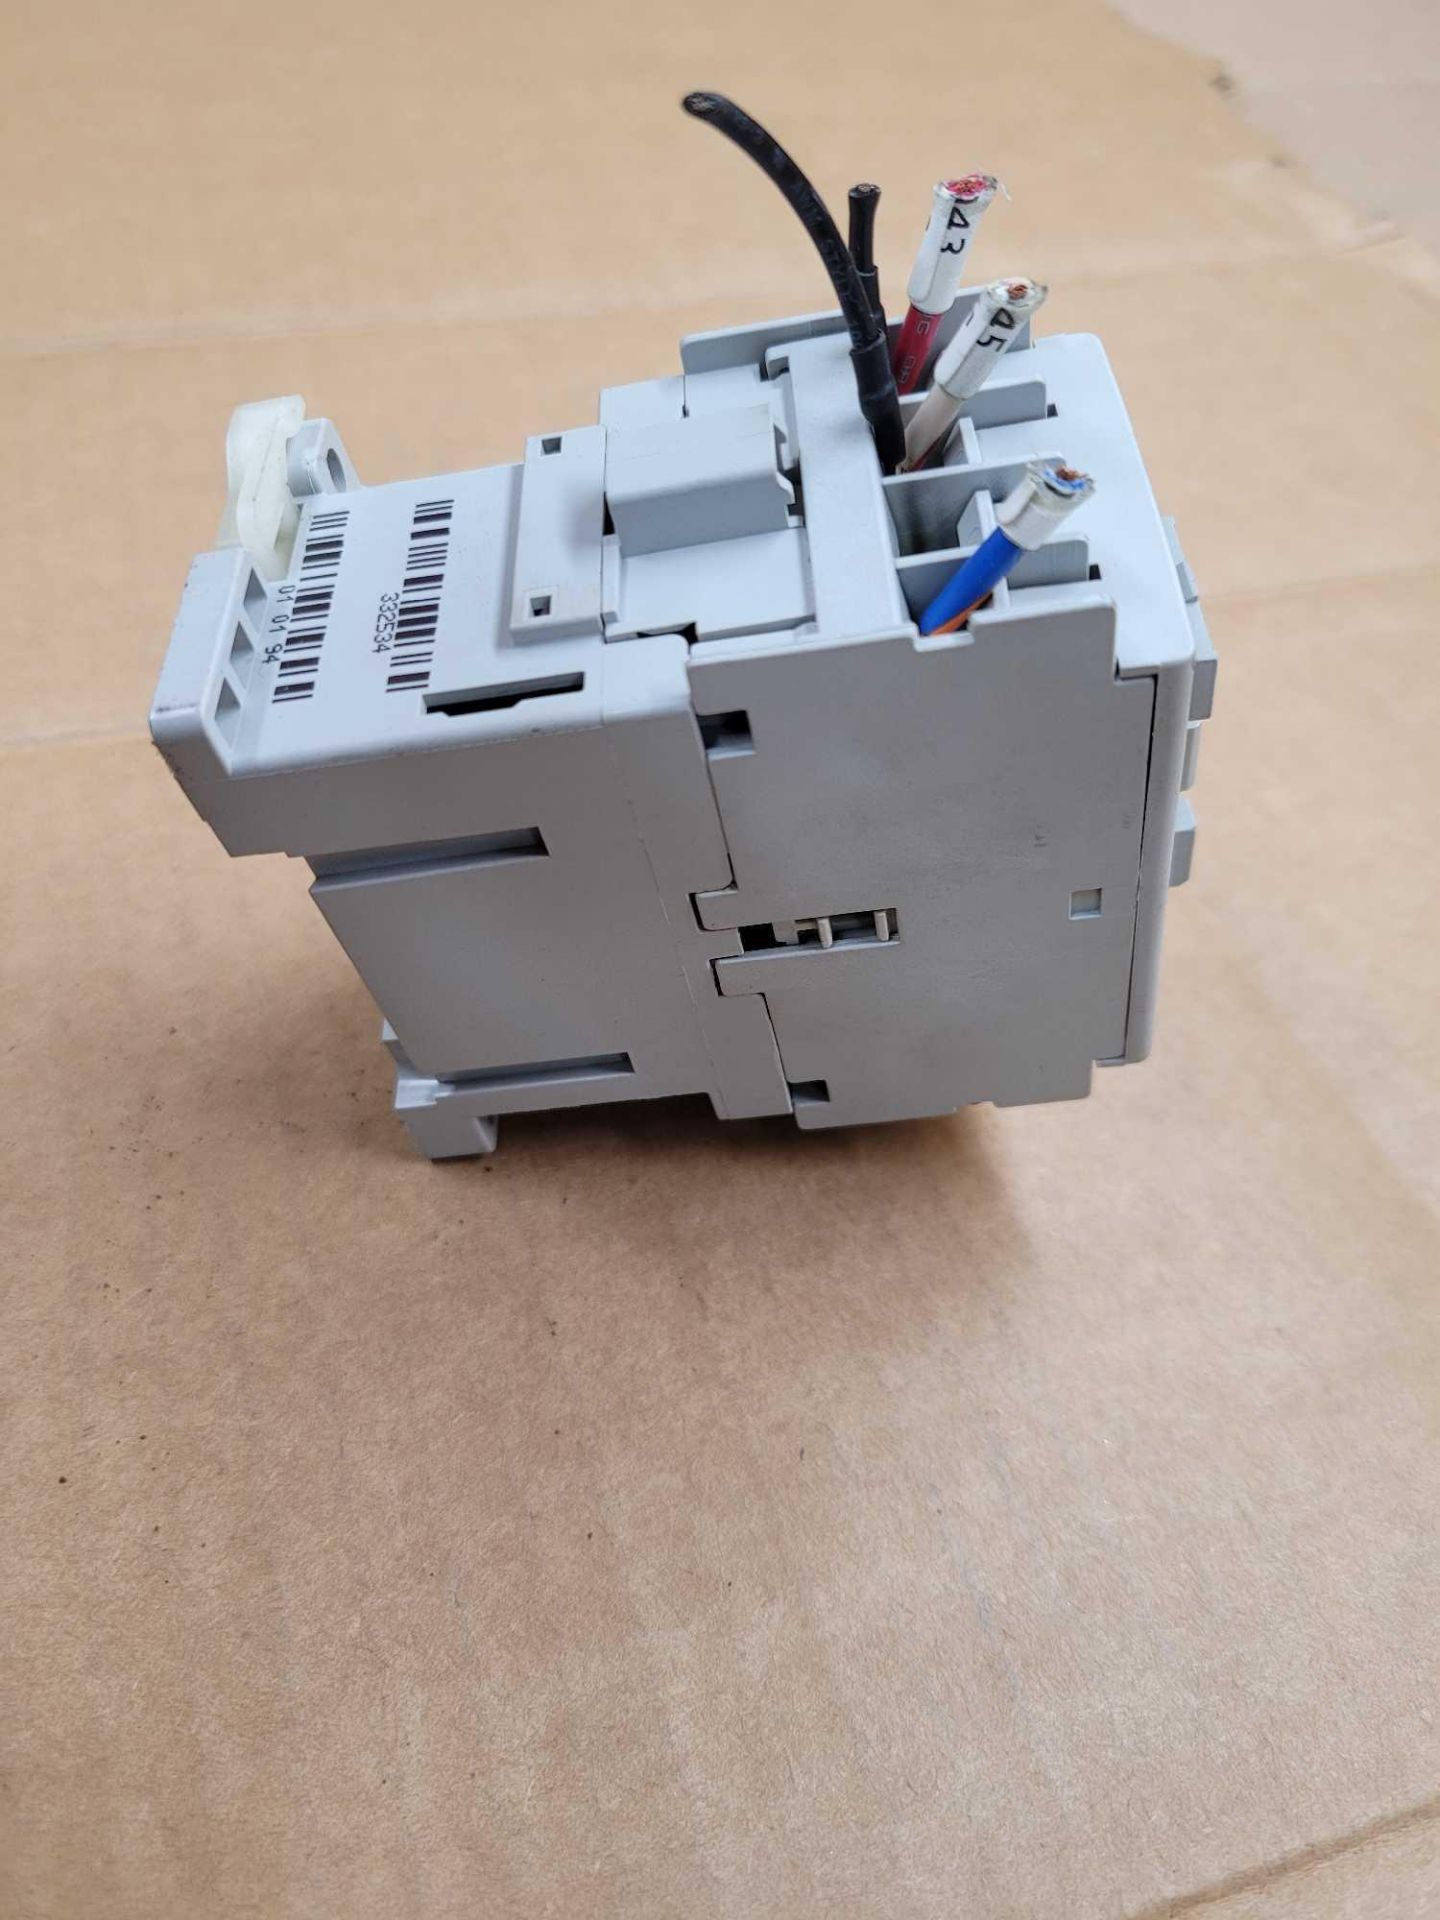 LOT OF 6 ALLEN BRADLEY 100-C09E*10 / Series A Contactor  /  Lot Weight: 5.2 lbs - Image 3 of 8